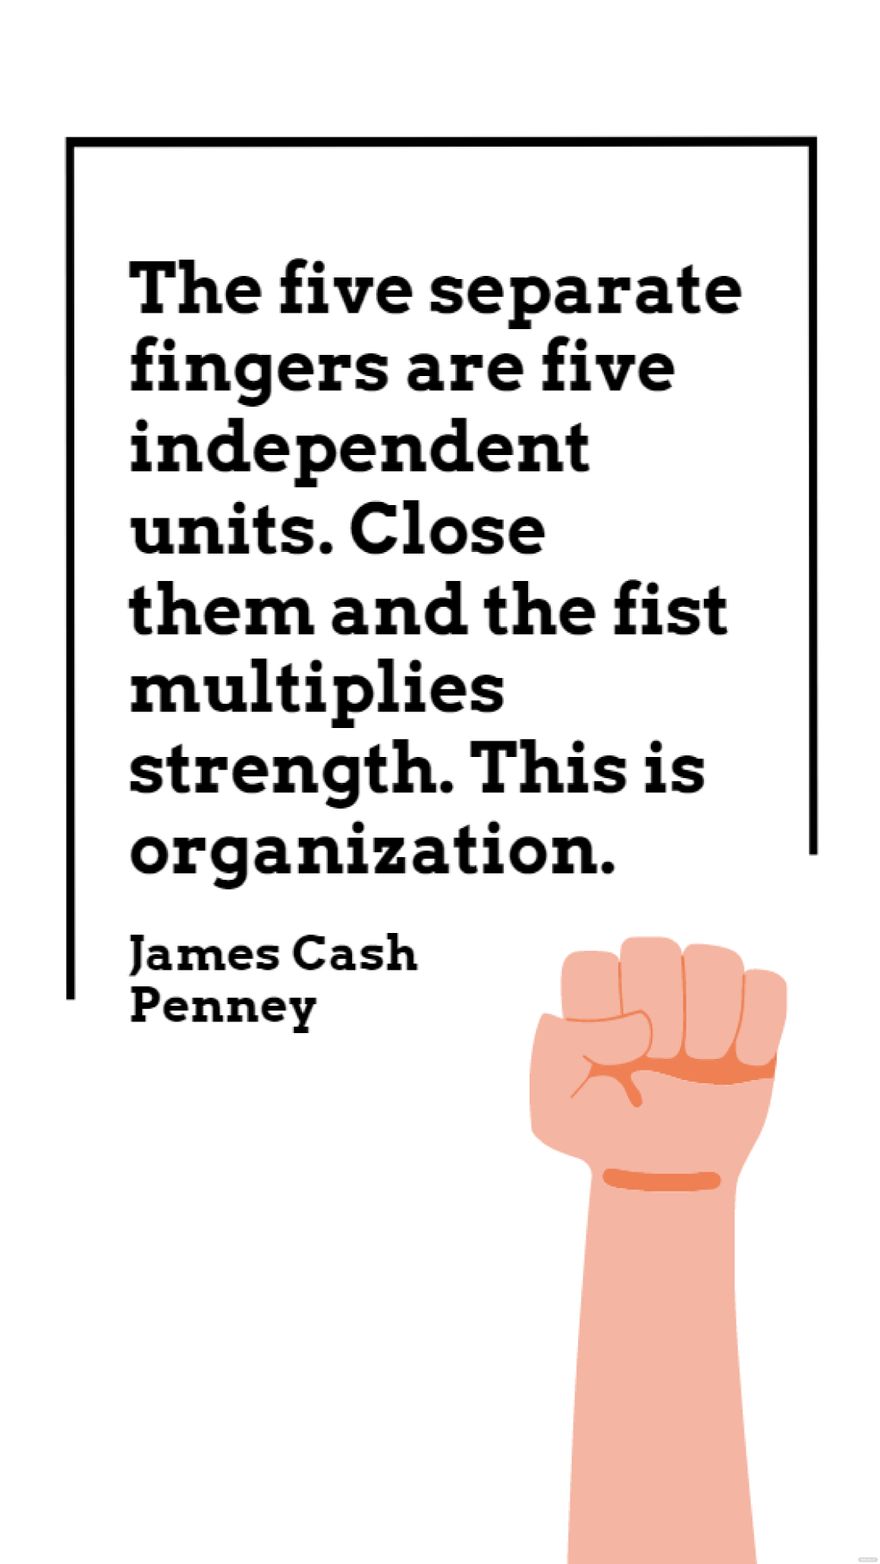 Free James Cash Penney - The five separate fingers are five independent units. Close them and the fist multiplies strength. This is organization. in JPG